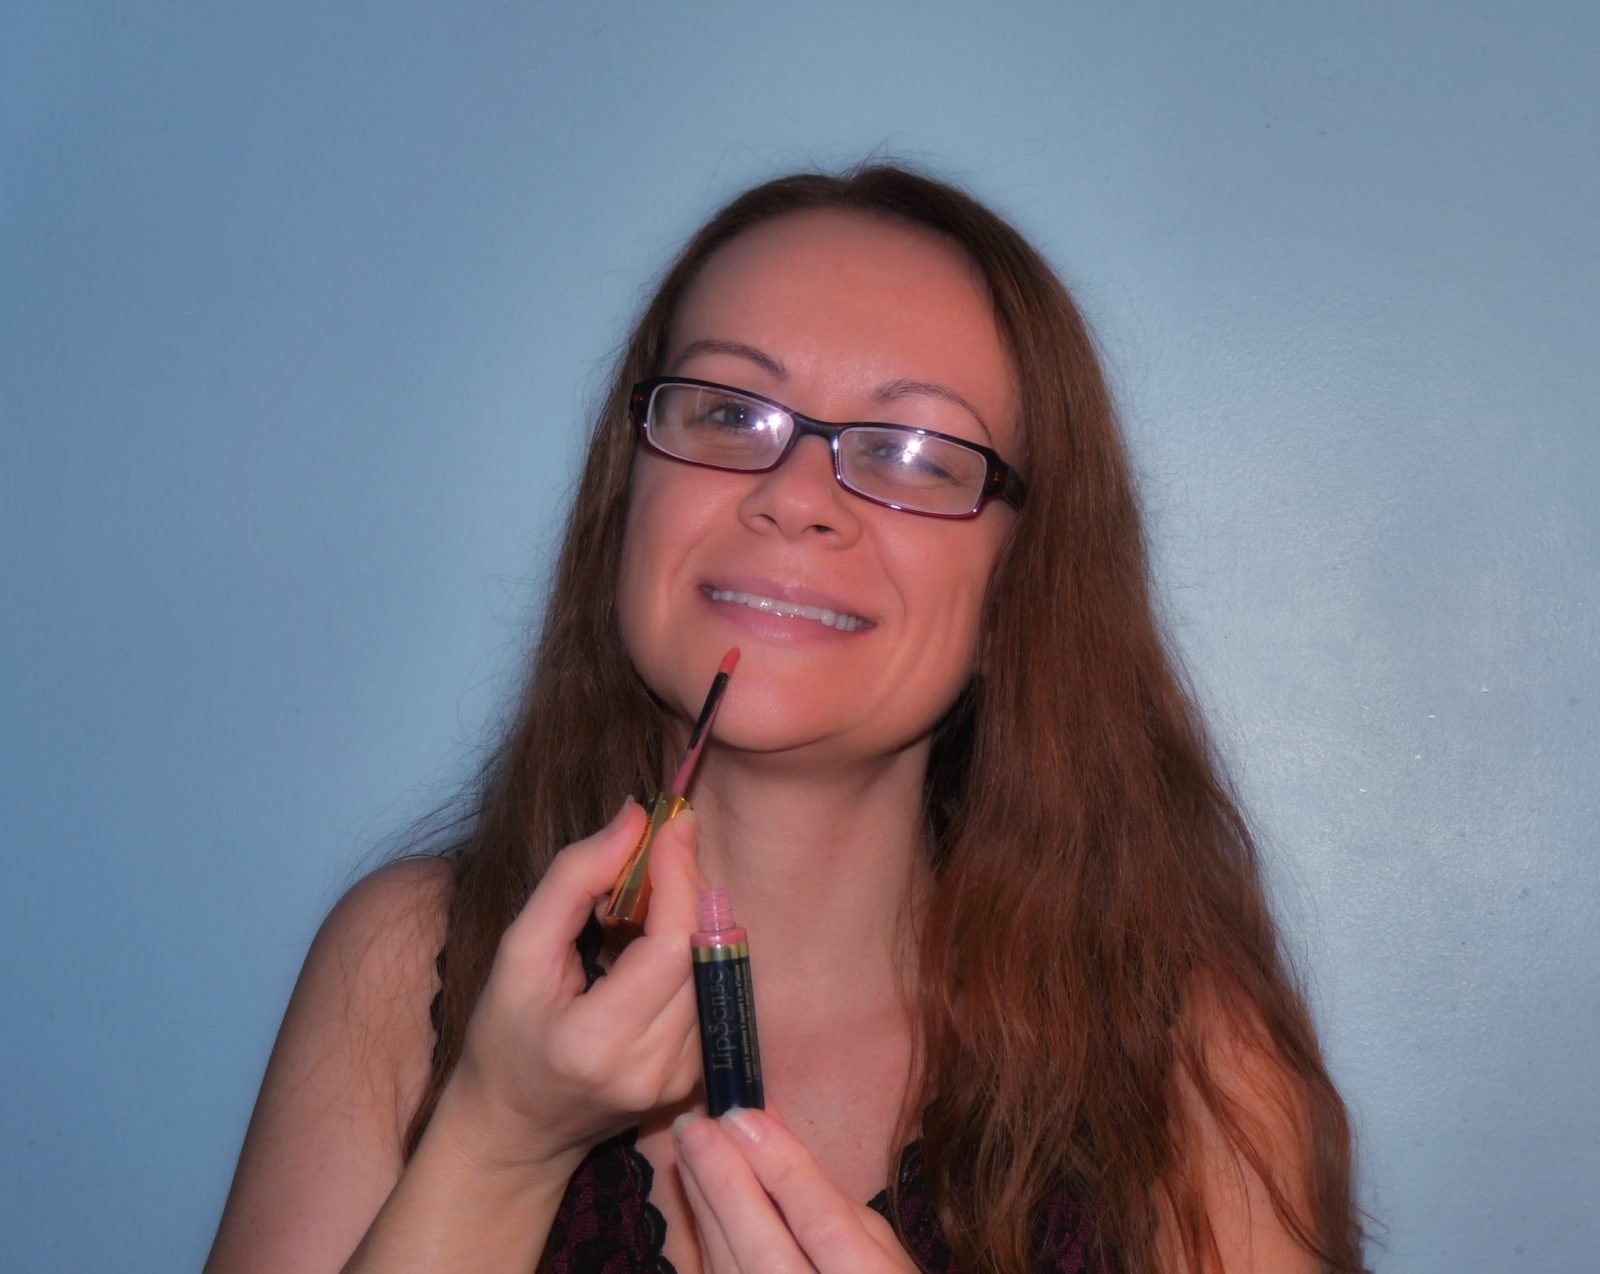 Lipsense Review: Does It Really Last And Look Great?